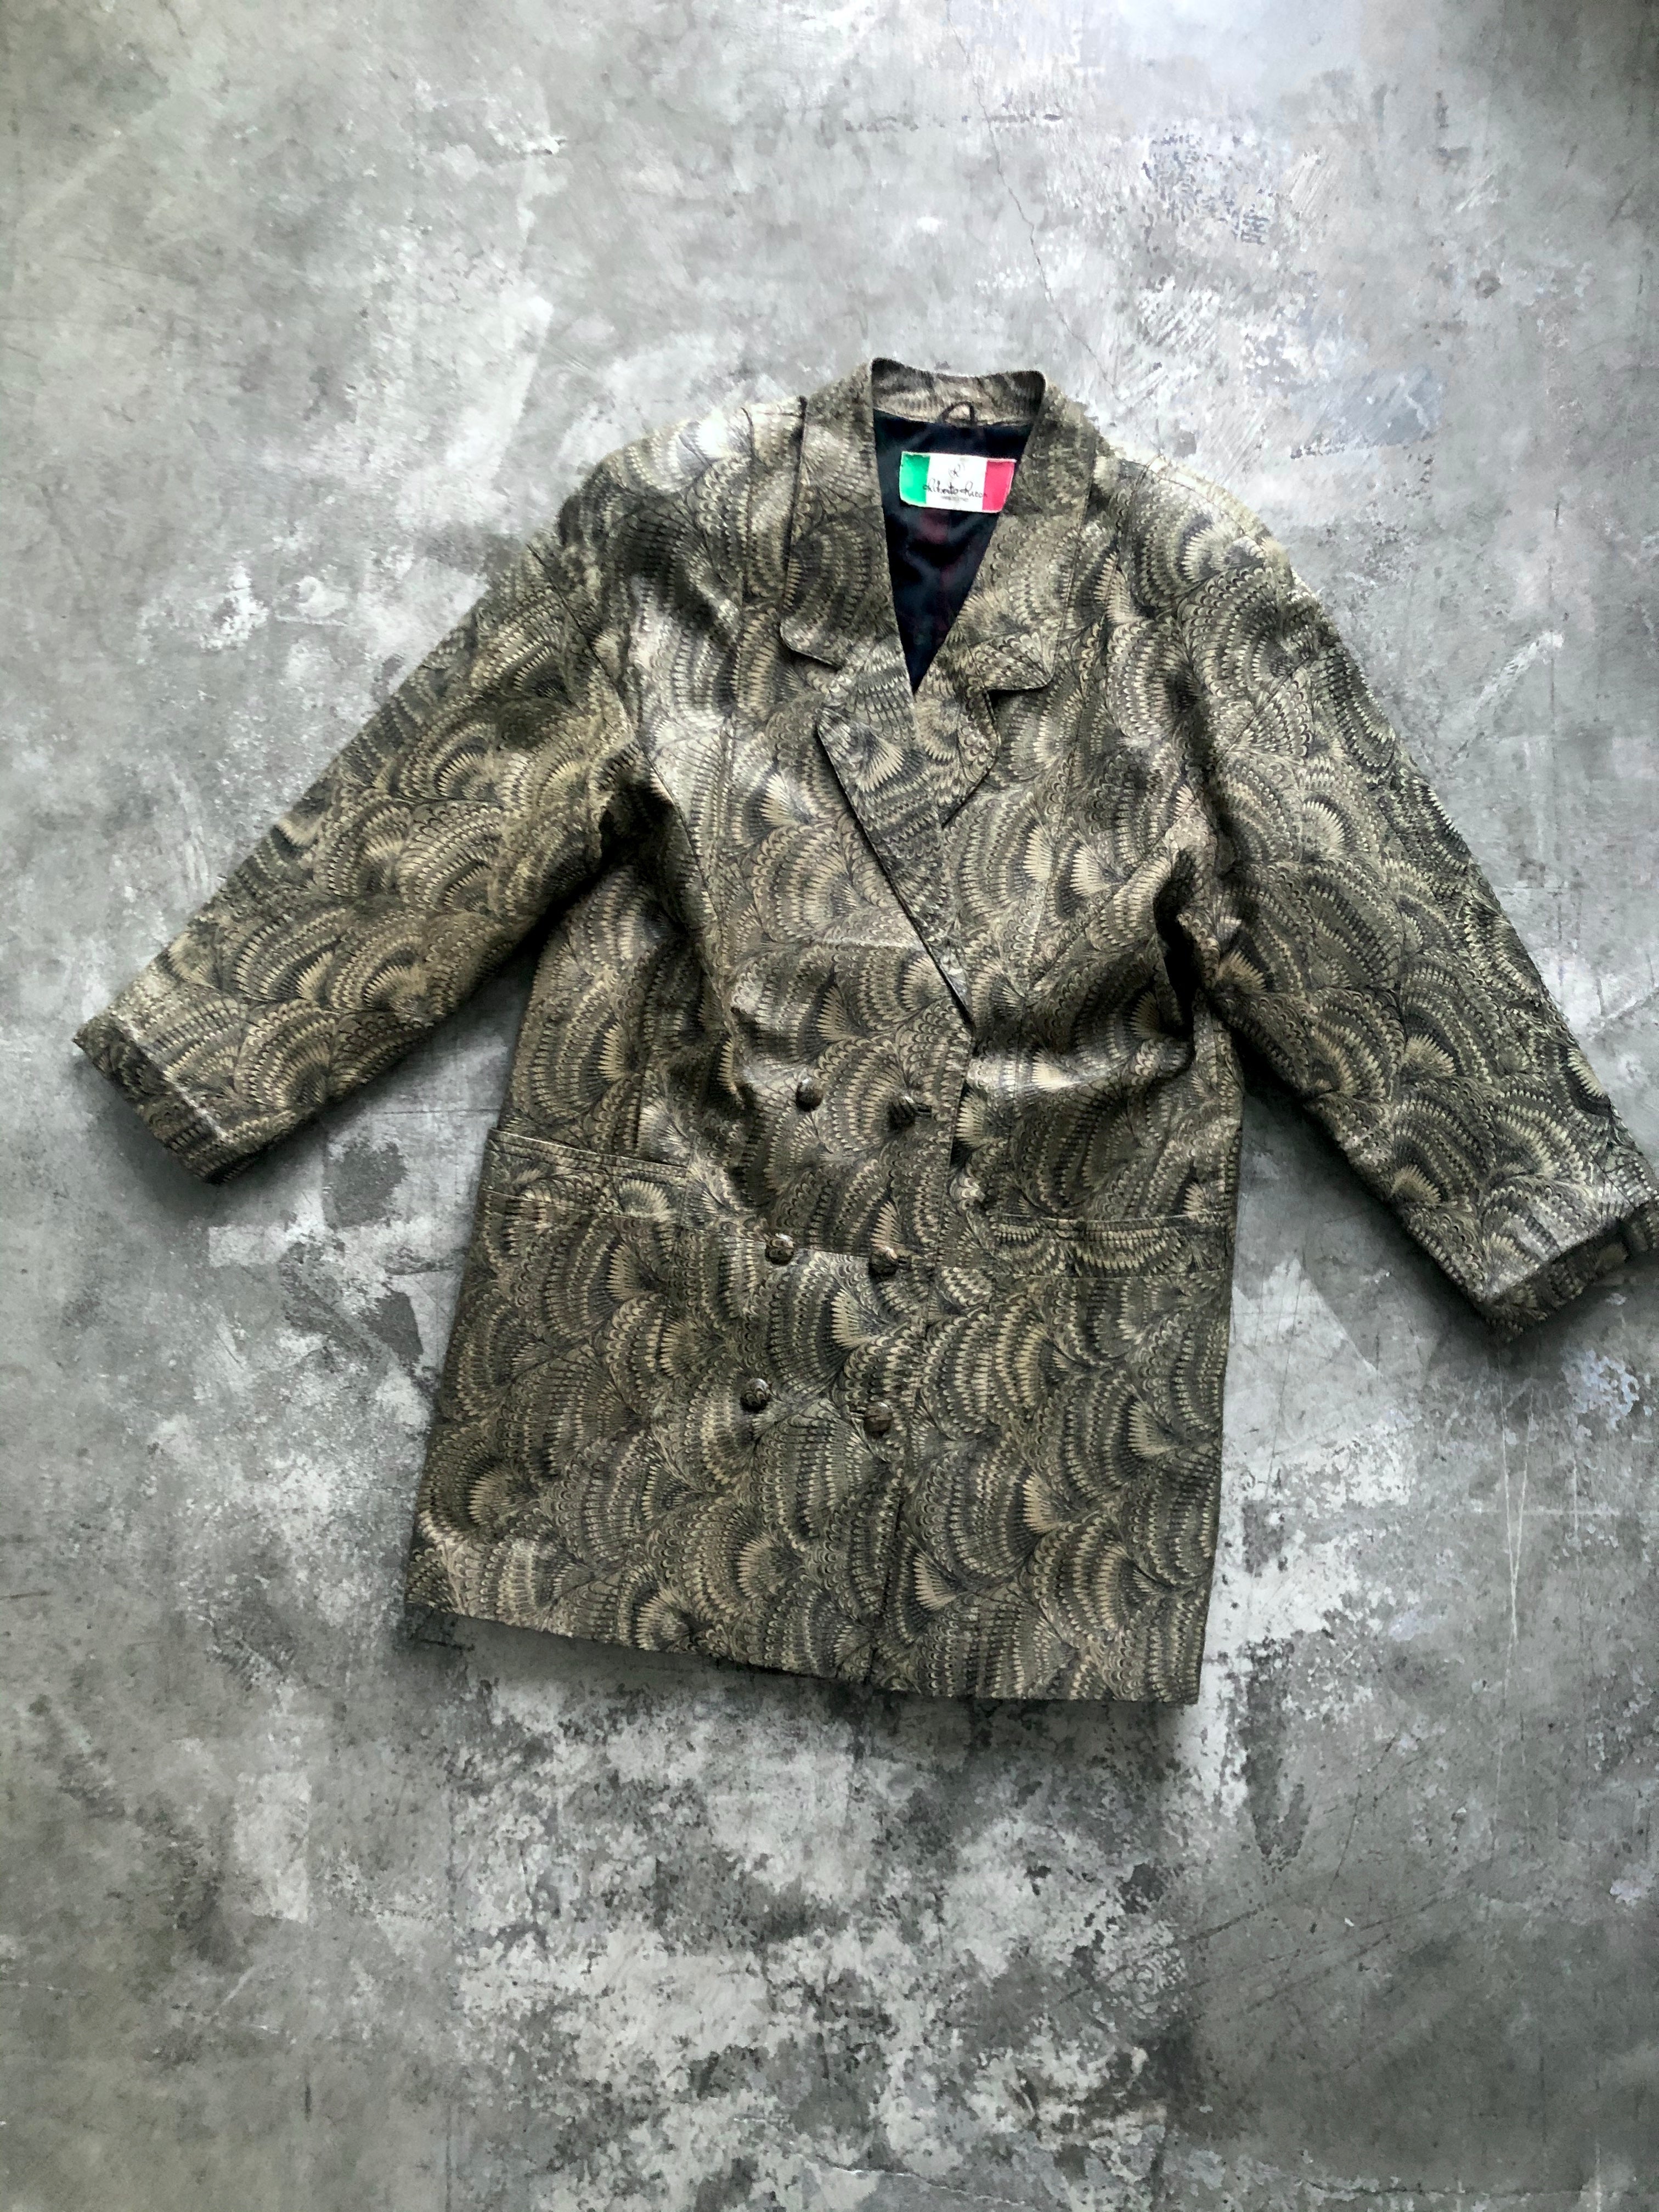 marble pattern leather coat